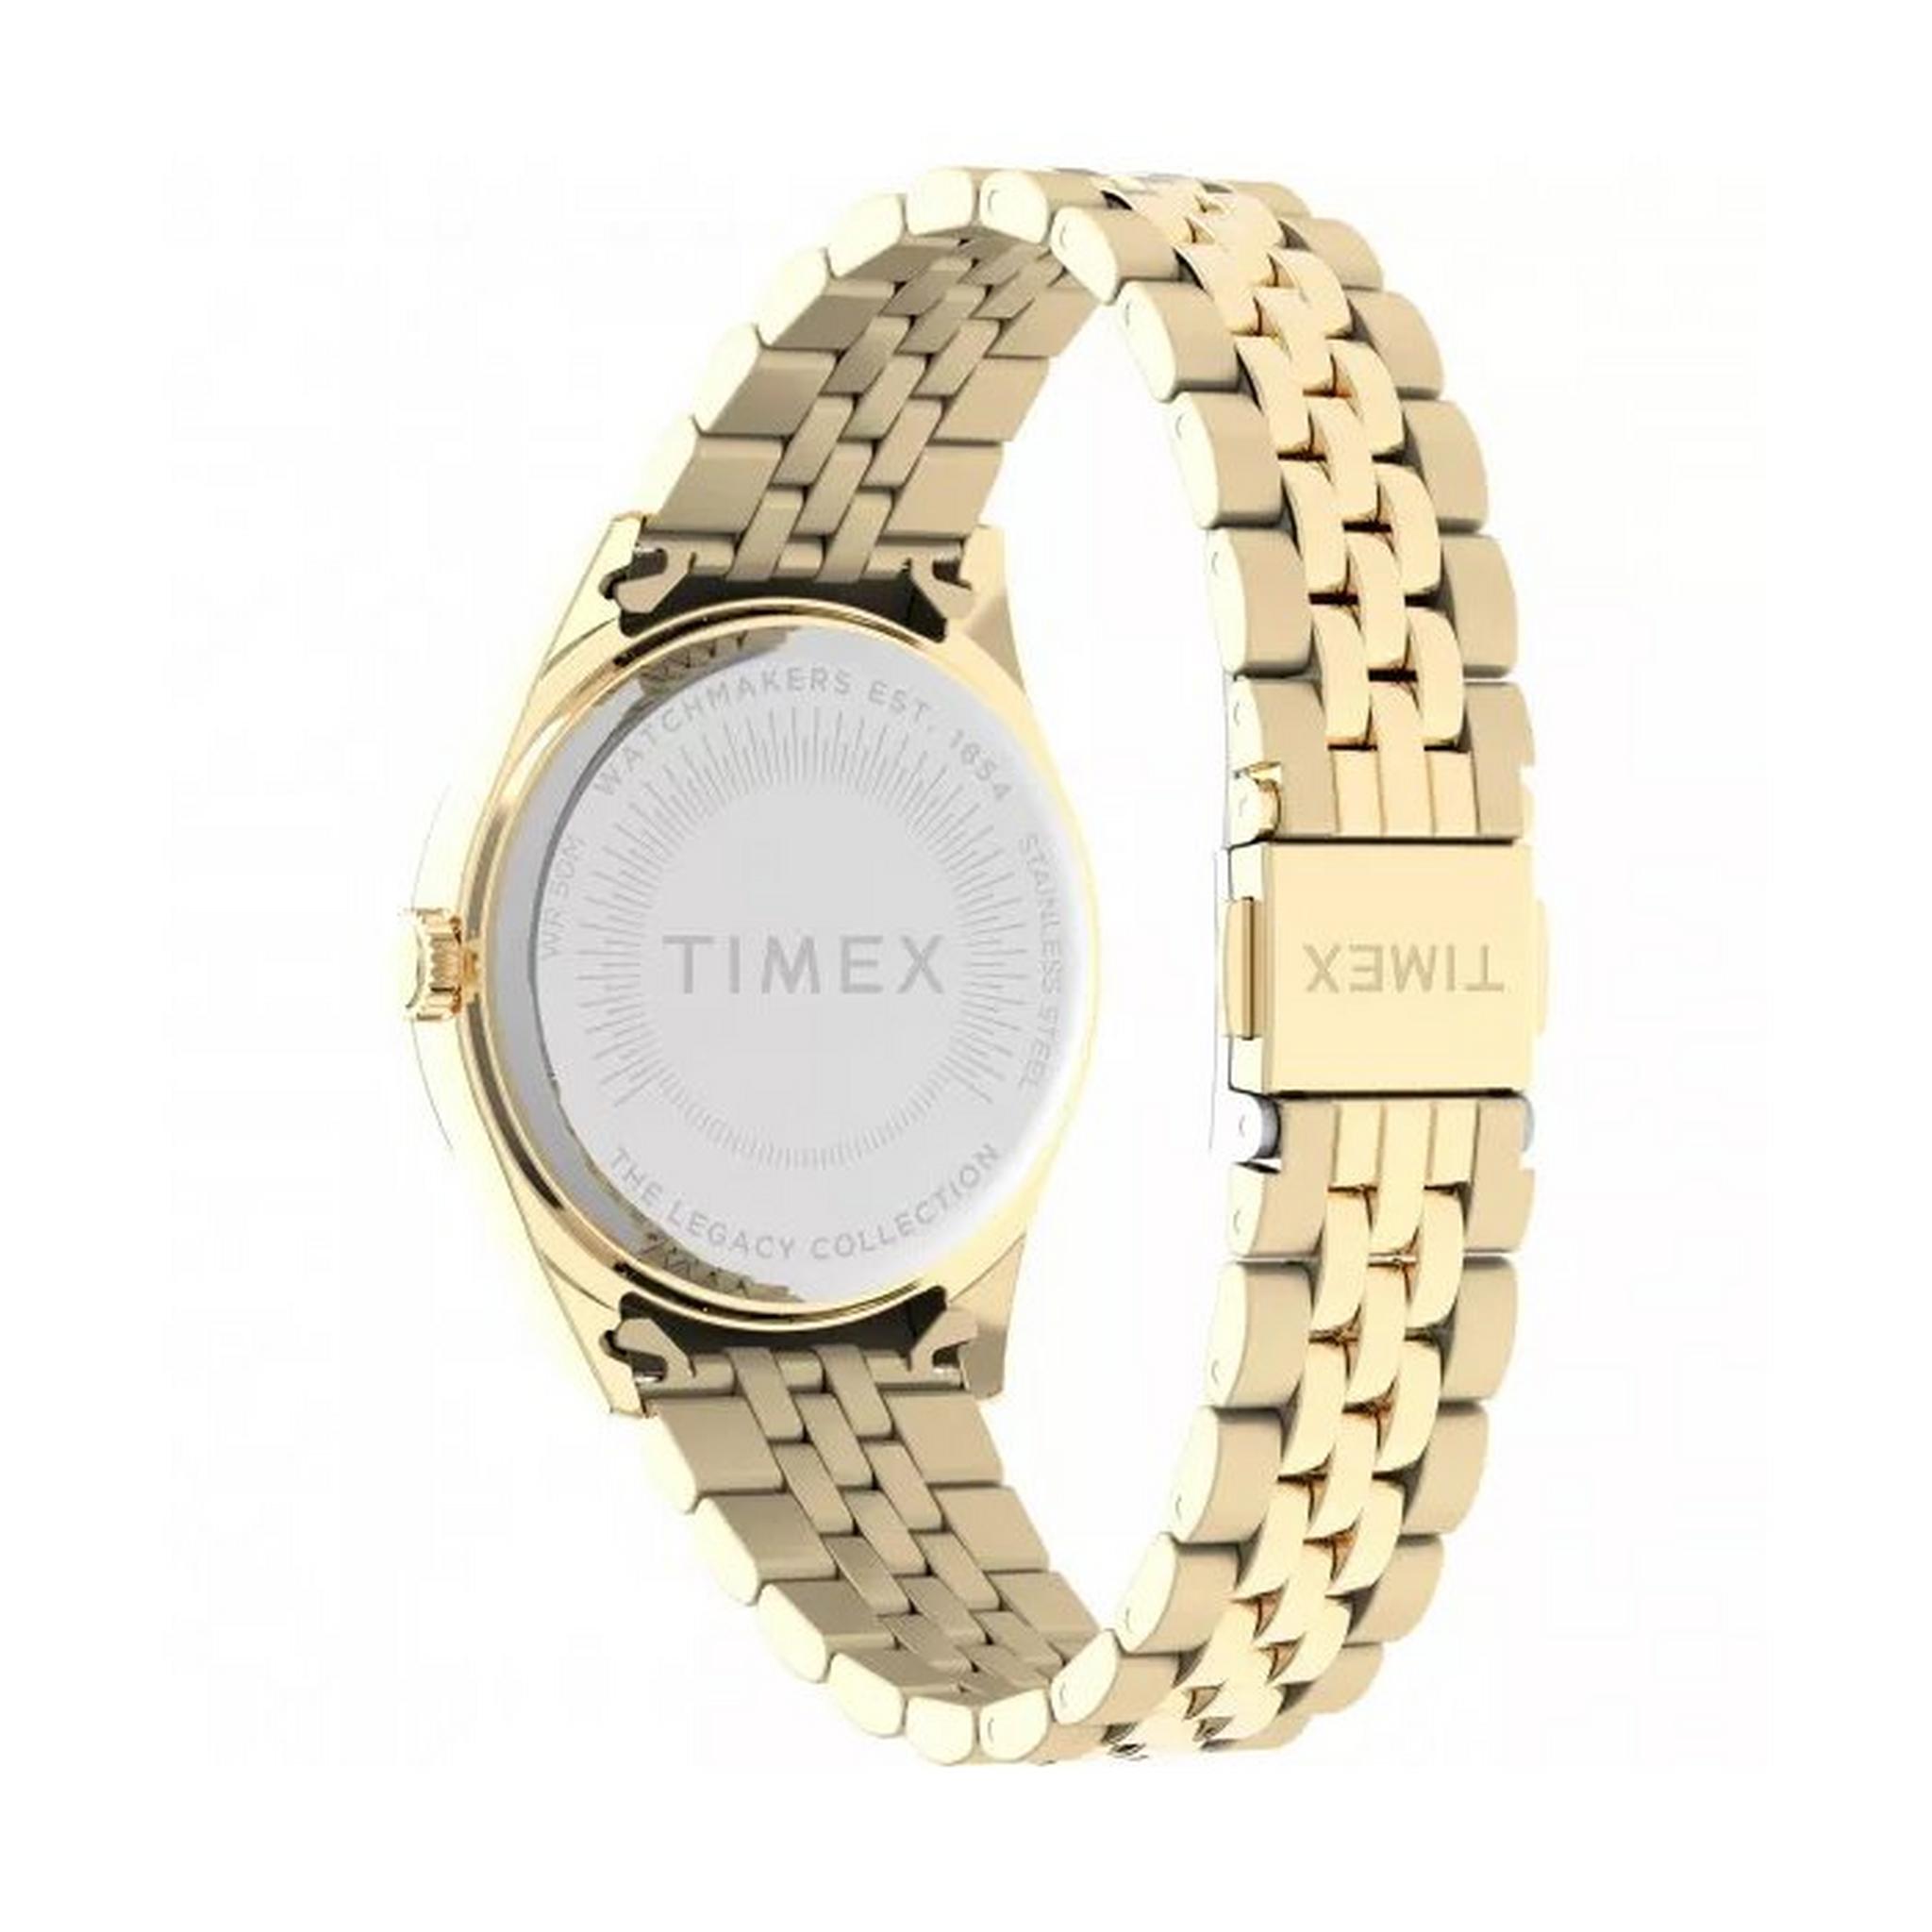 TIMEX Legacy Women's Watch, Analog, 36mm, Stainless Steel Strap, TW2V68300 – Gold